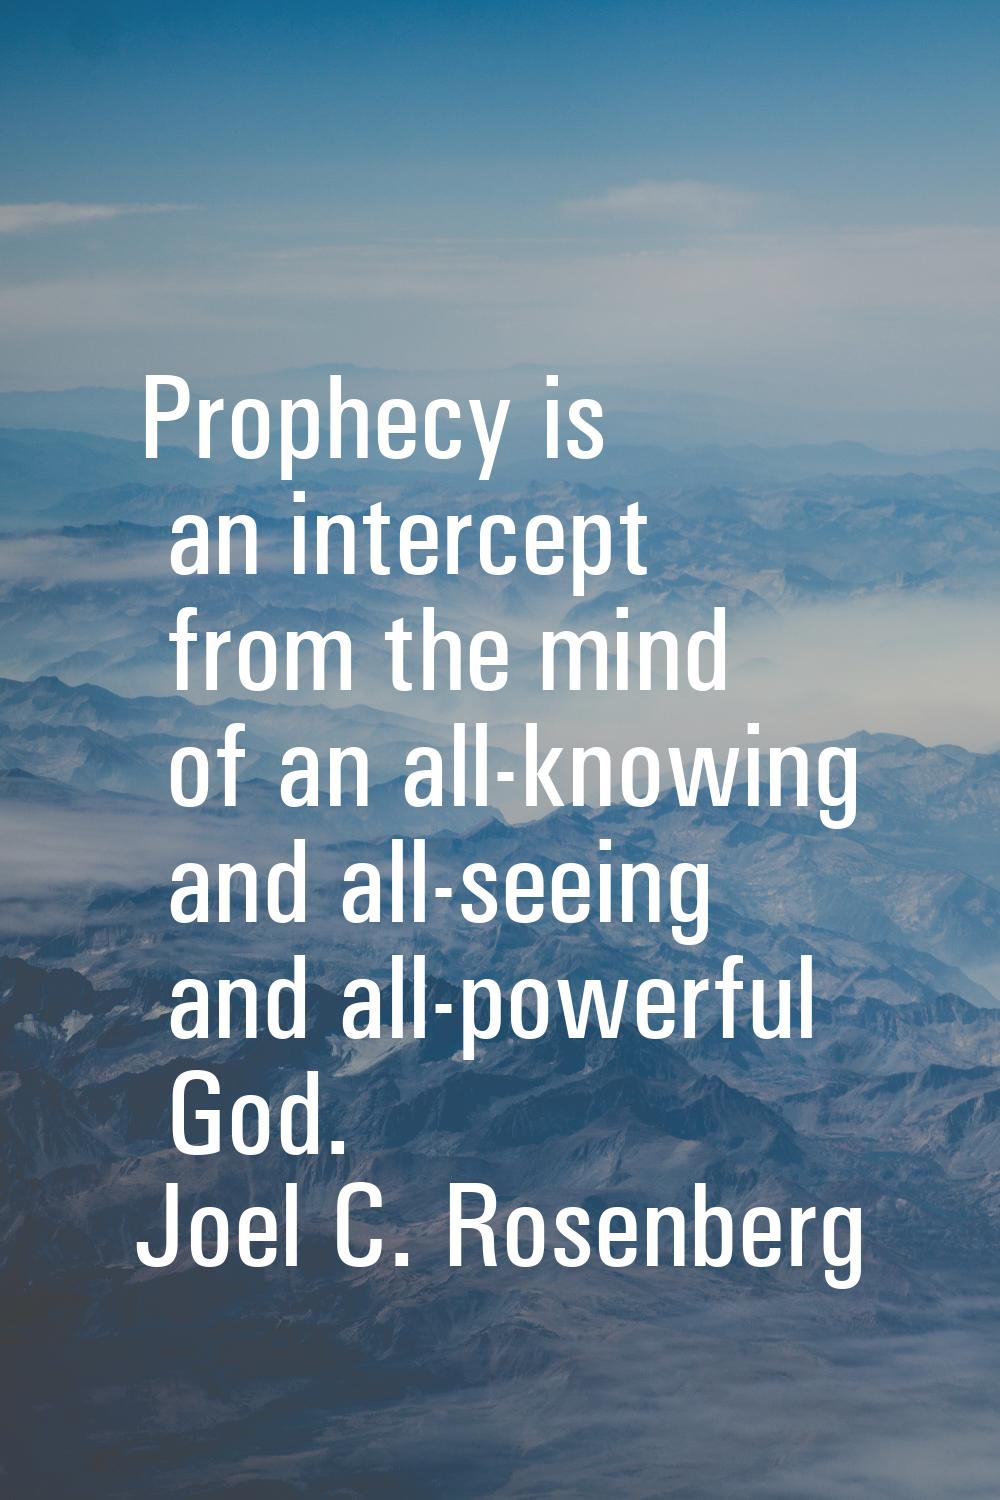 Prophecy is an intercept from the mind of an all-knowing and all-seeing and all-powerful God.